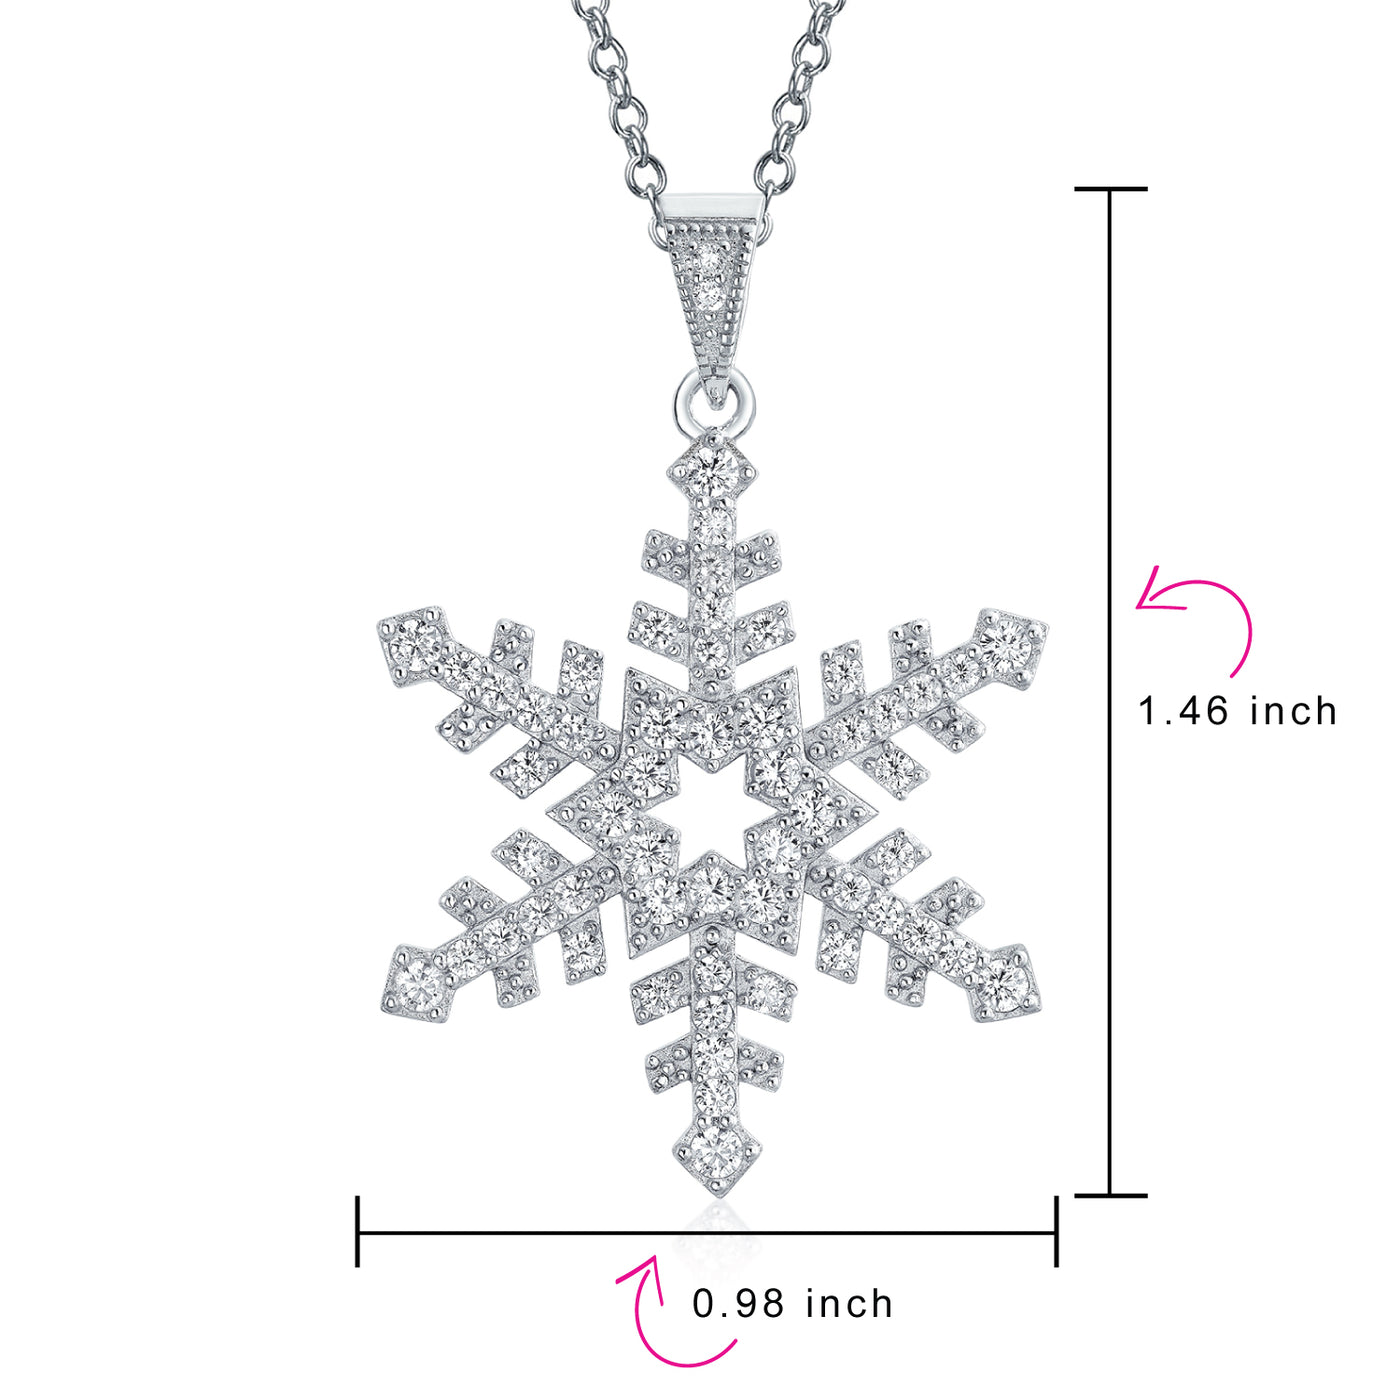 Branch Snowflake Cubic Zirconia CZ Pendant Necklace Sterling Silver